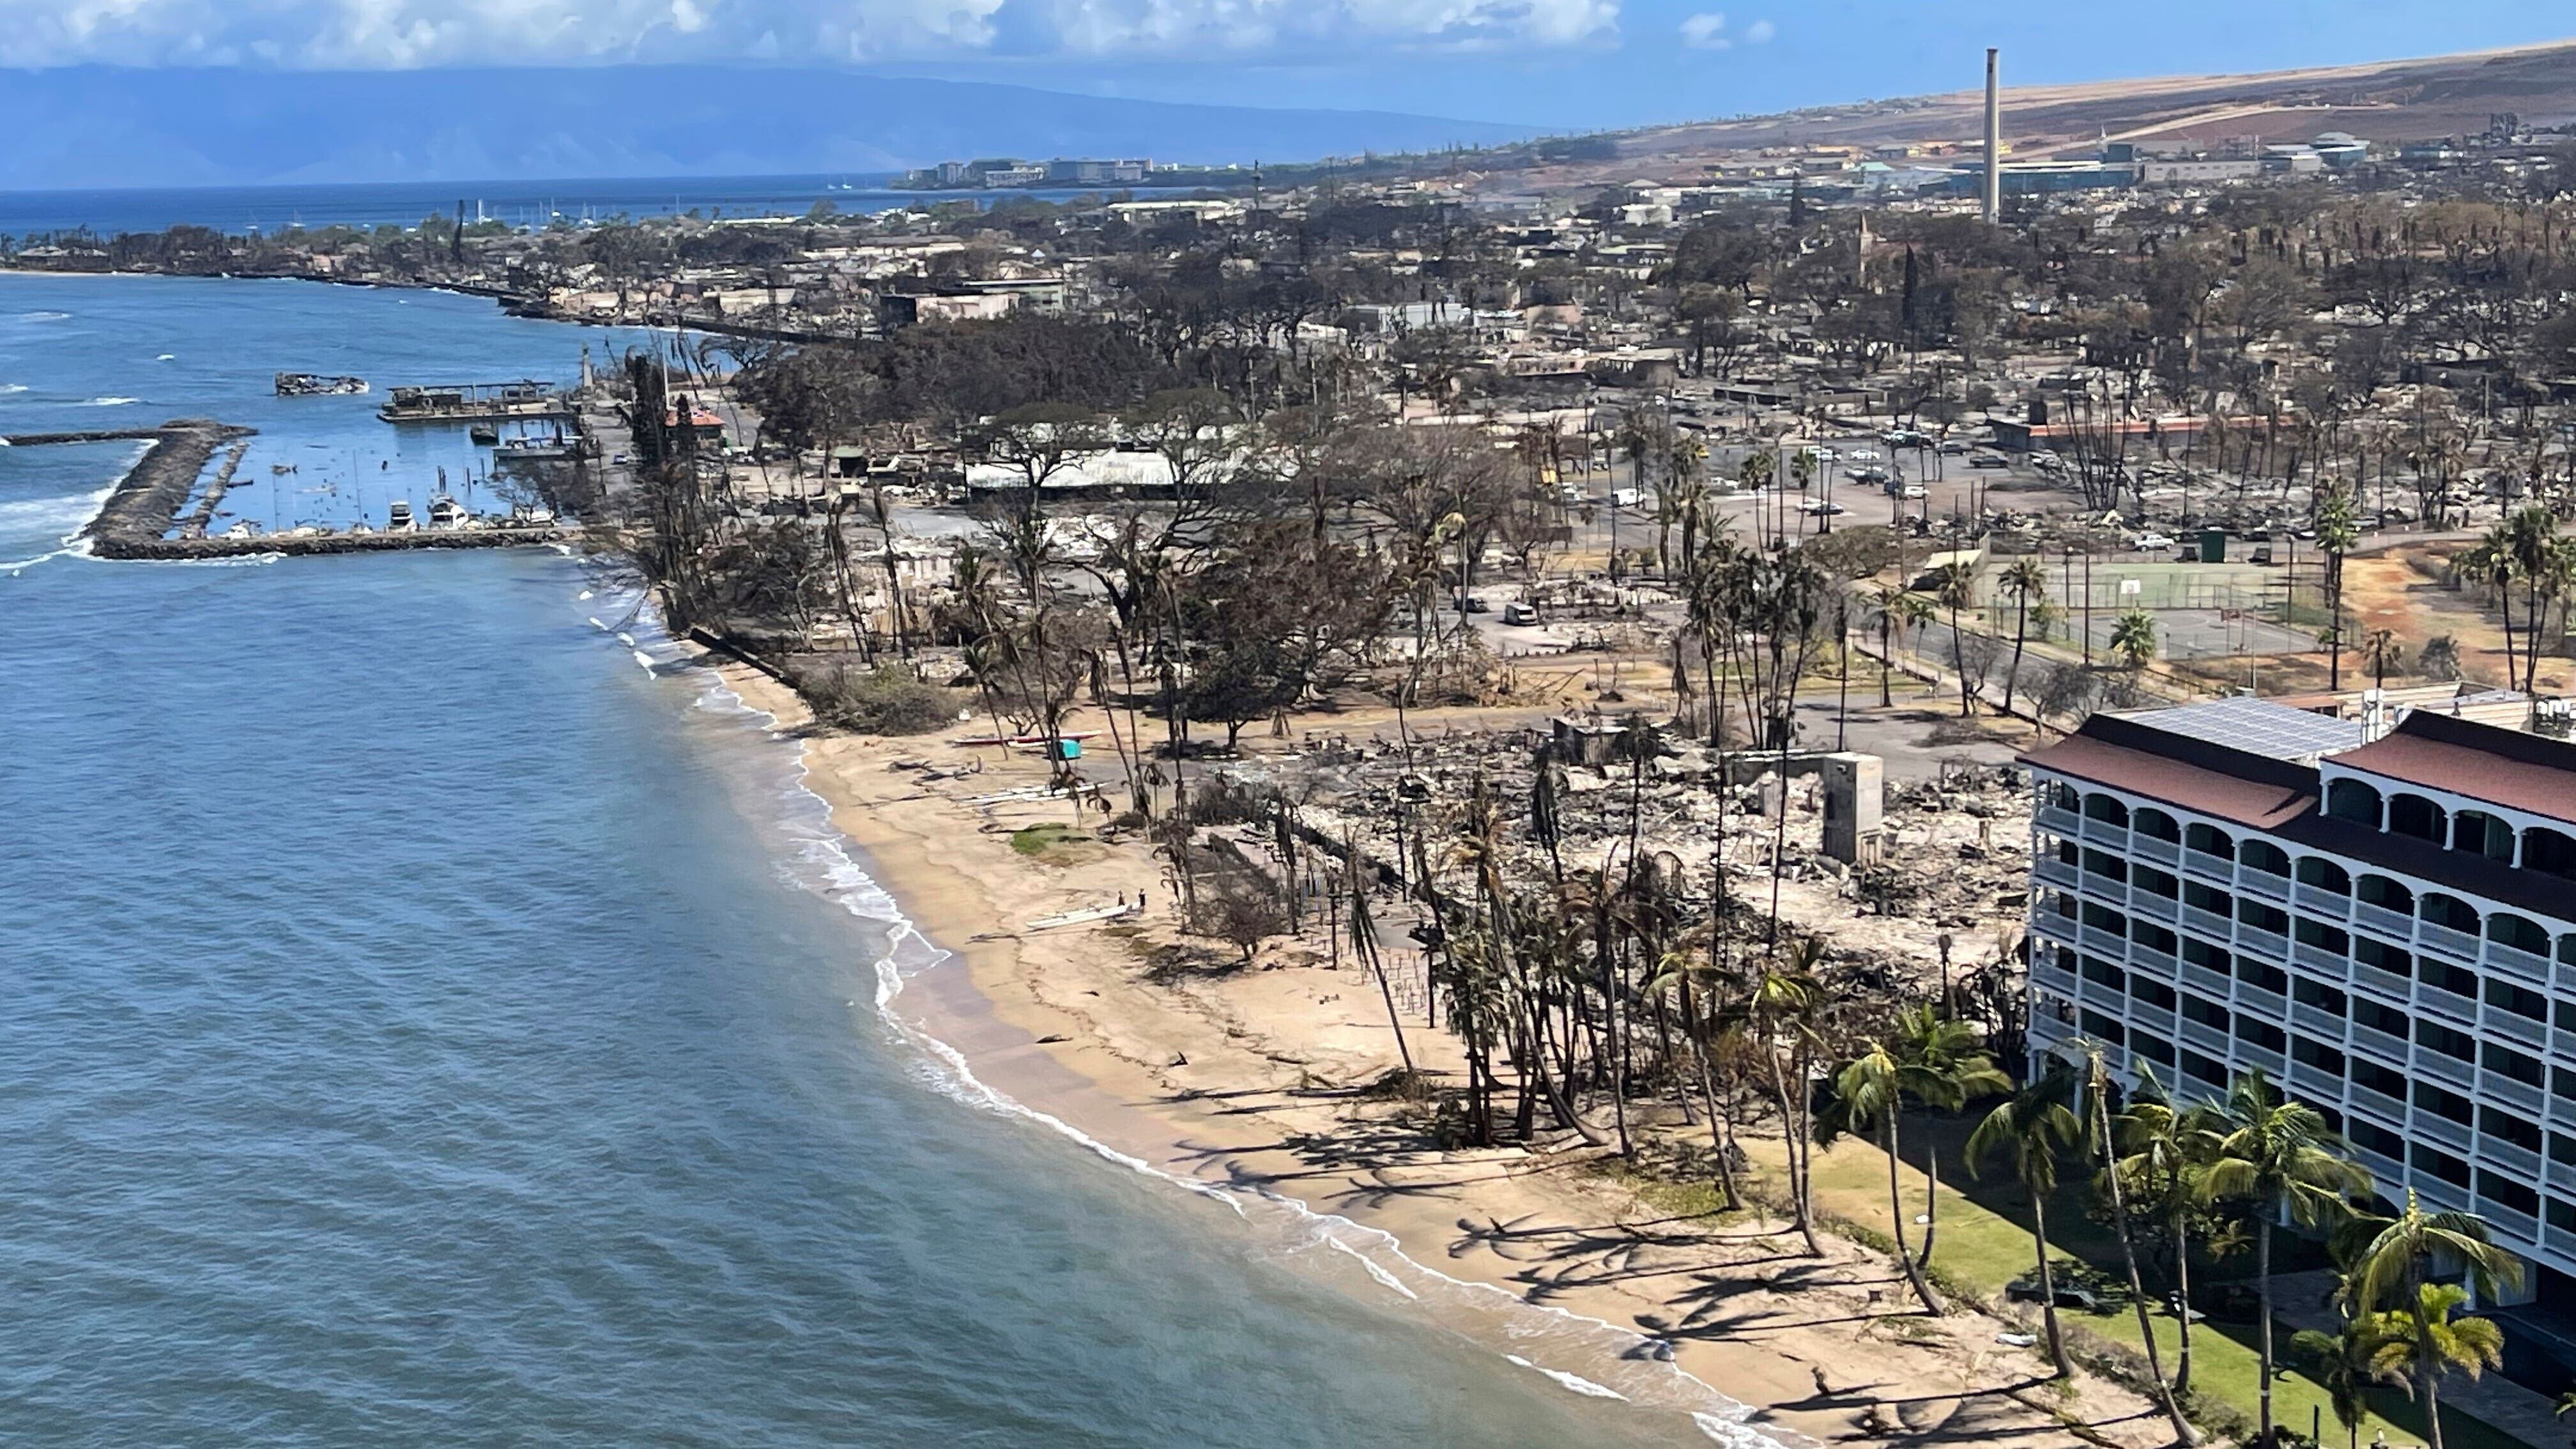 The death toll from the wildfire on the Hawaiian island of Maui has reached 93, making it the deadliest US wildfire for over a century (Hawaii Department of Land and Natural Resources/AP)